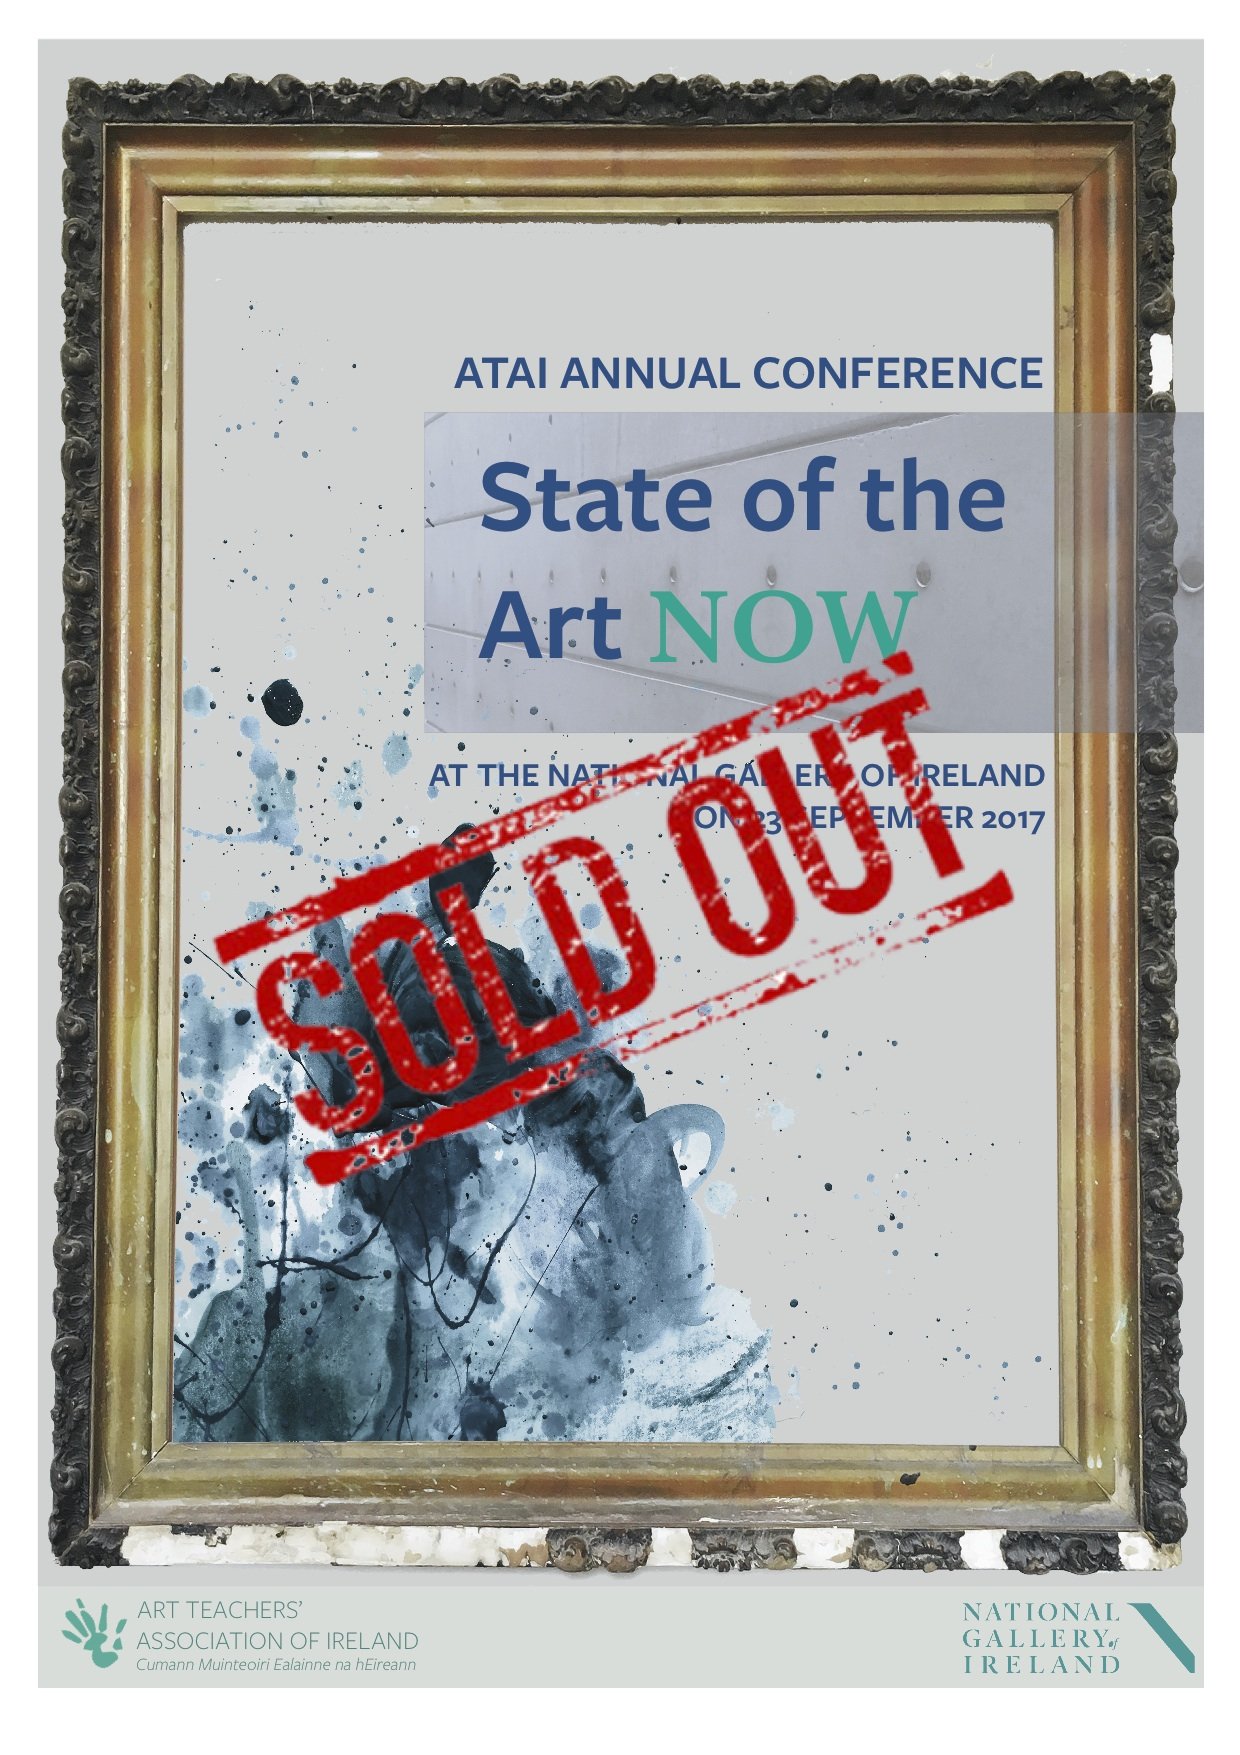 sold out conference image 2017